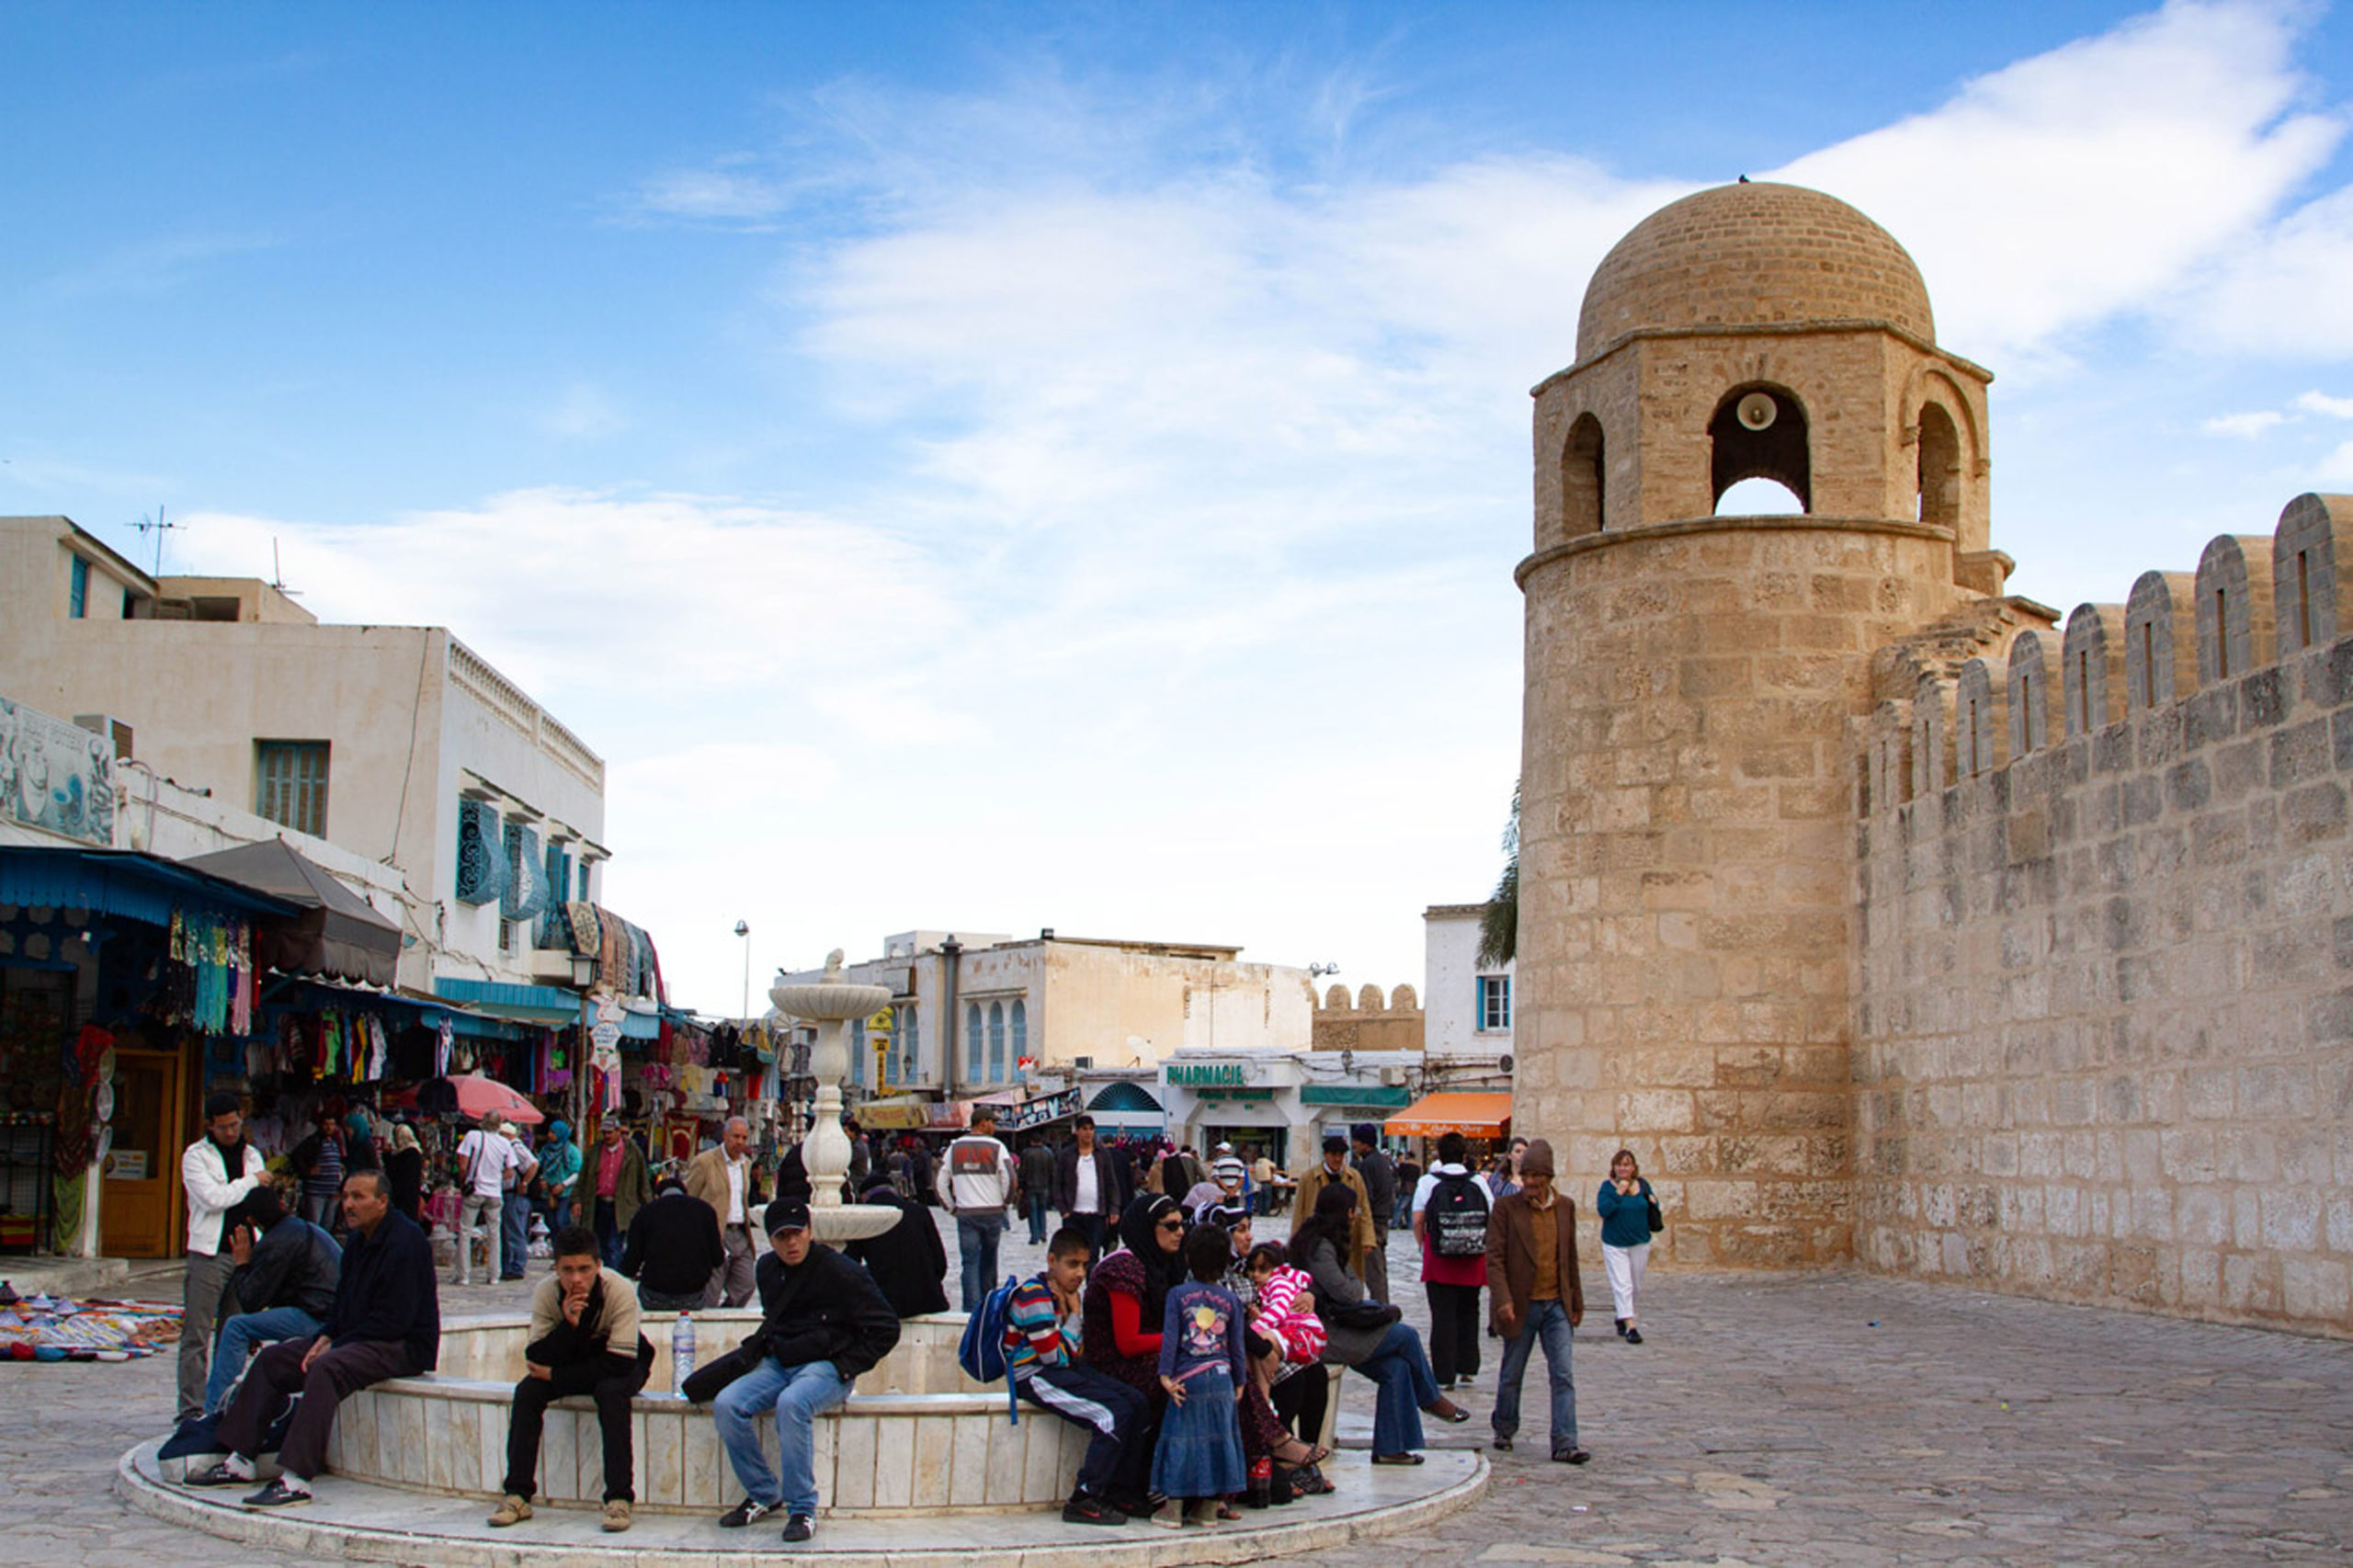 The Sousse Medina is where all the locals congregate each evening, and it's a something to see on a visit to Tunisia.